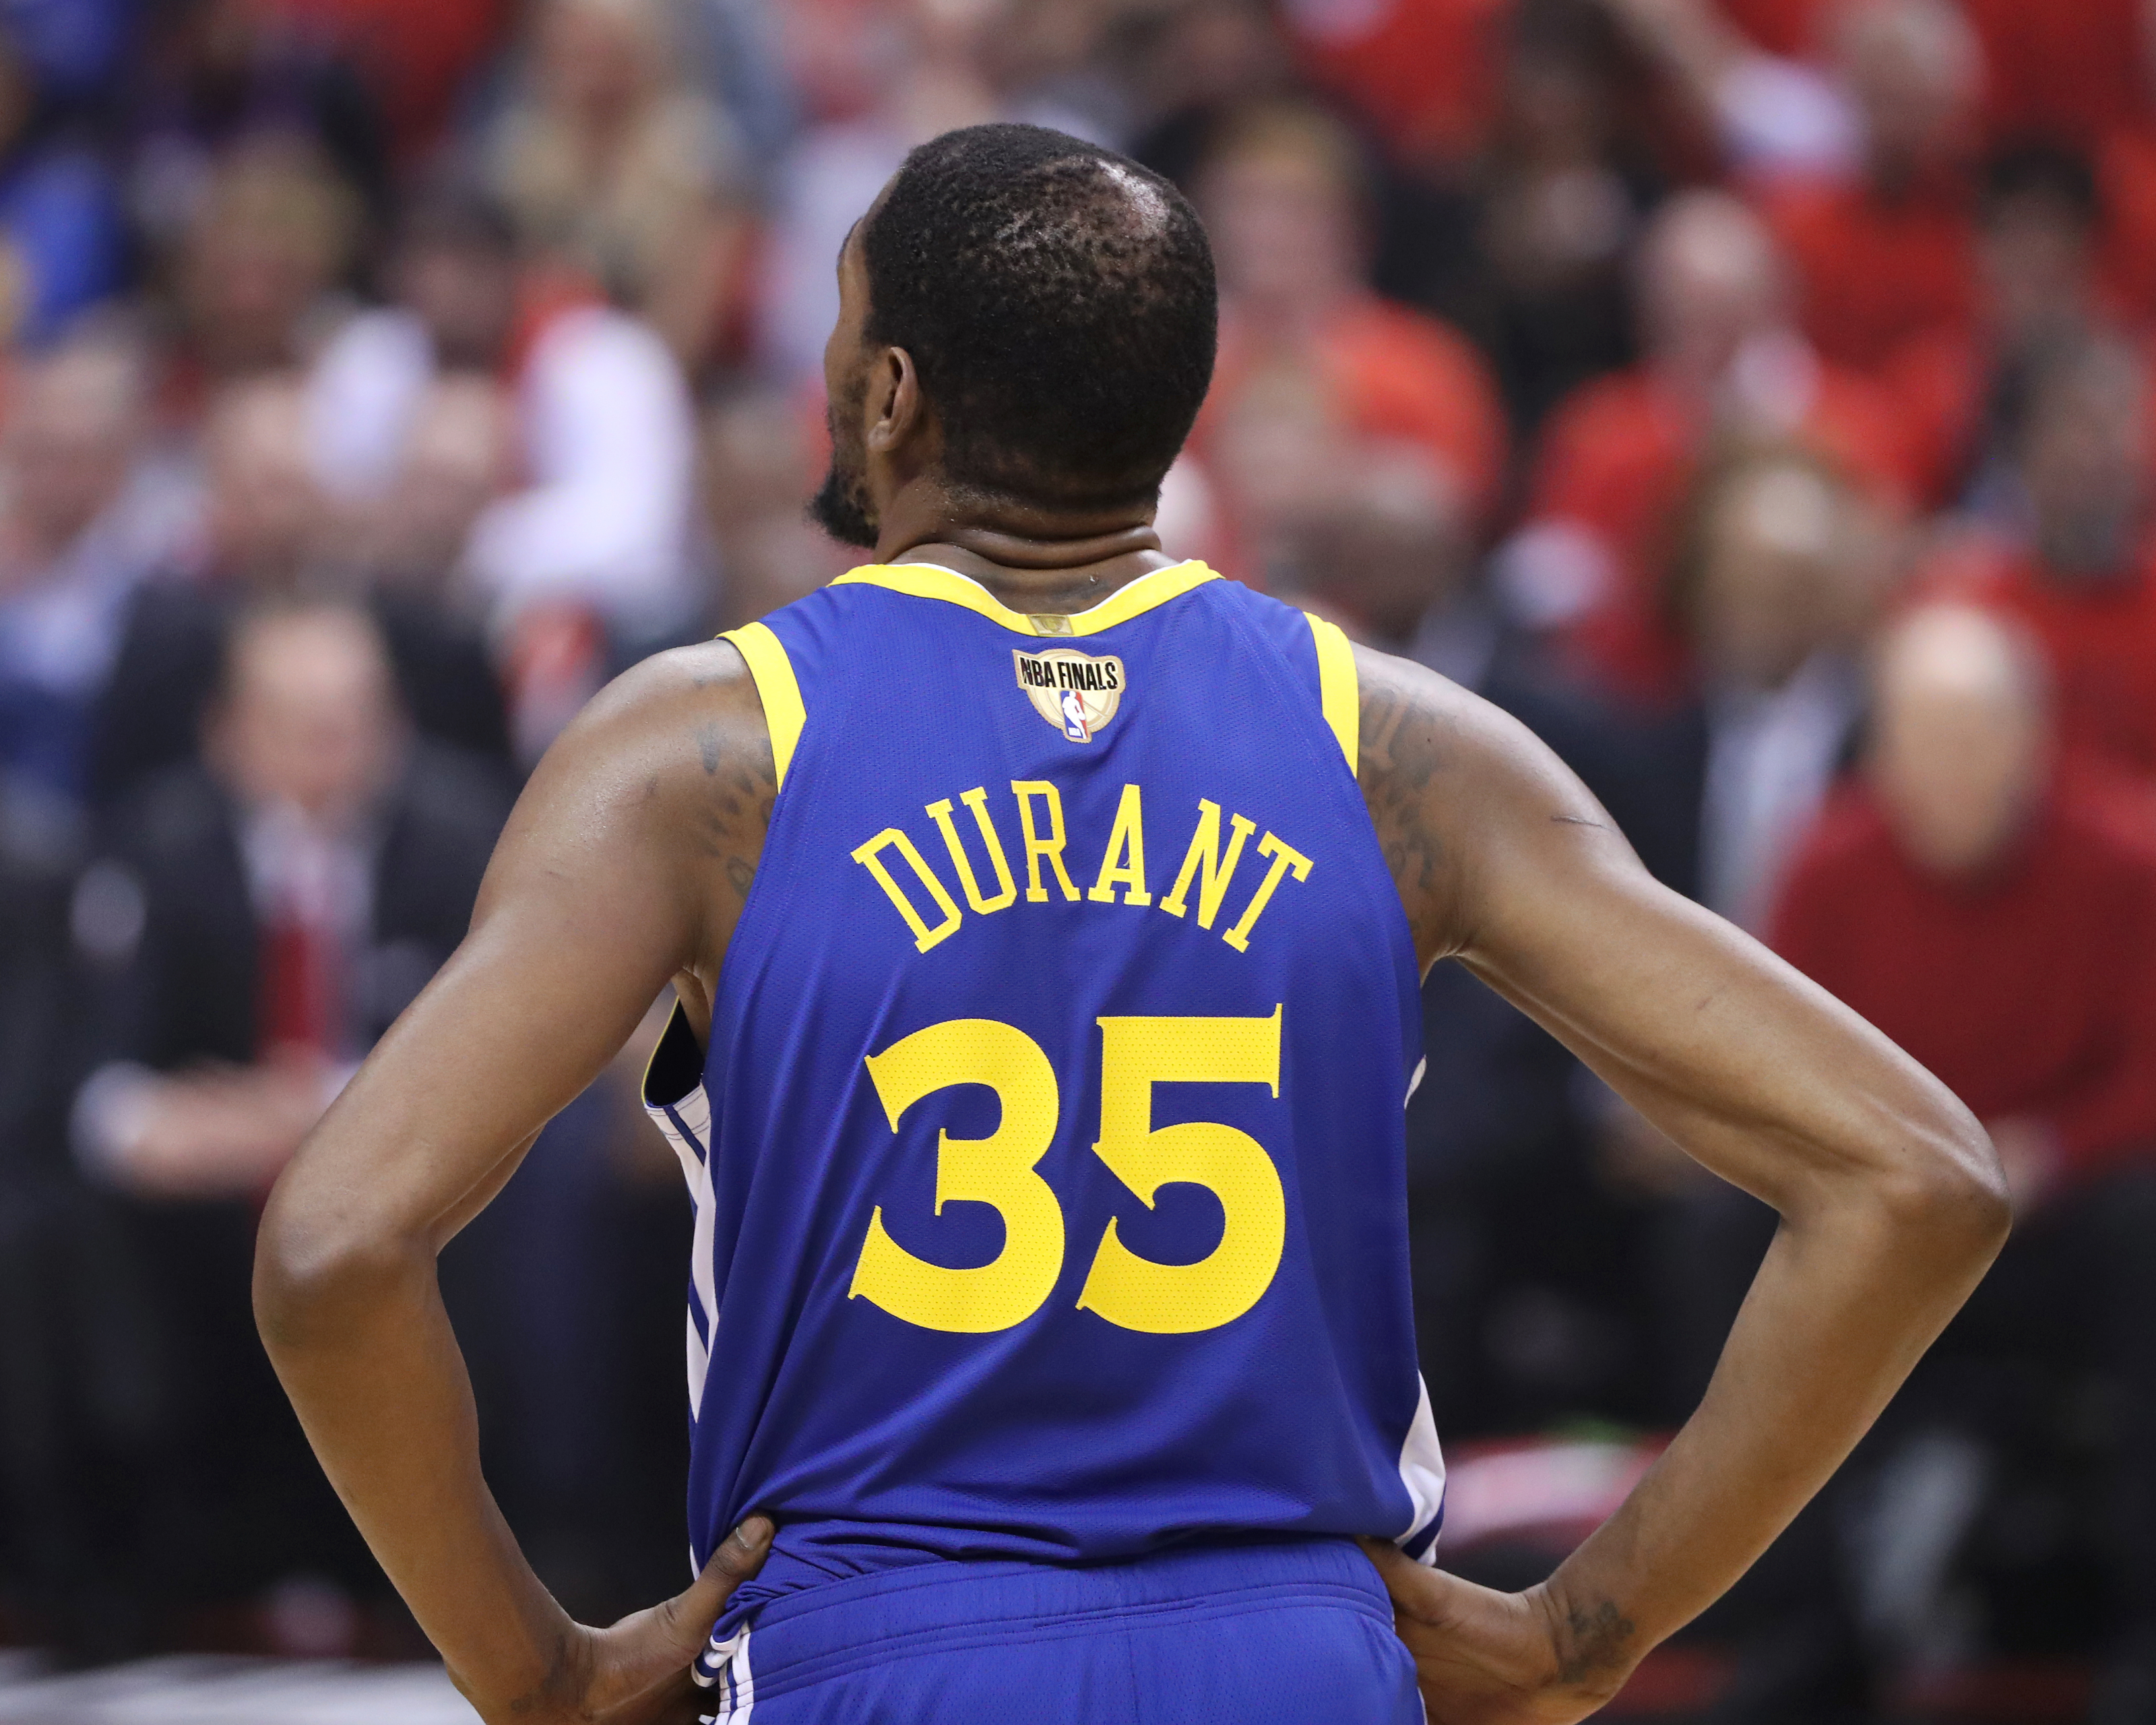 Why 35? The story behind a jersey number and Kevin Durant's